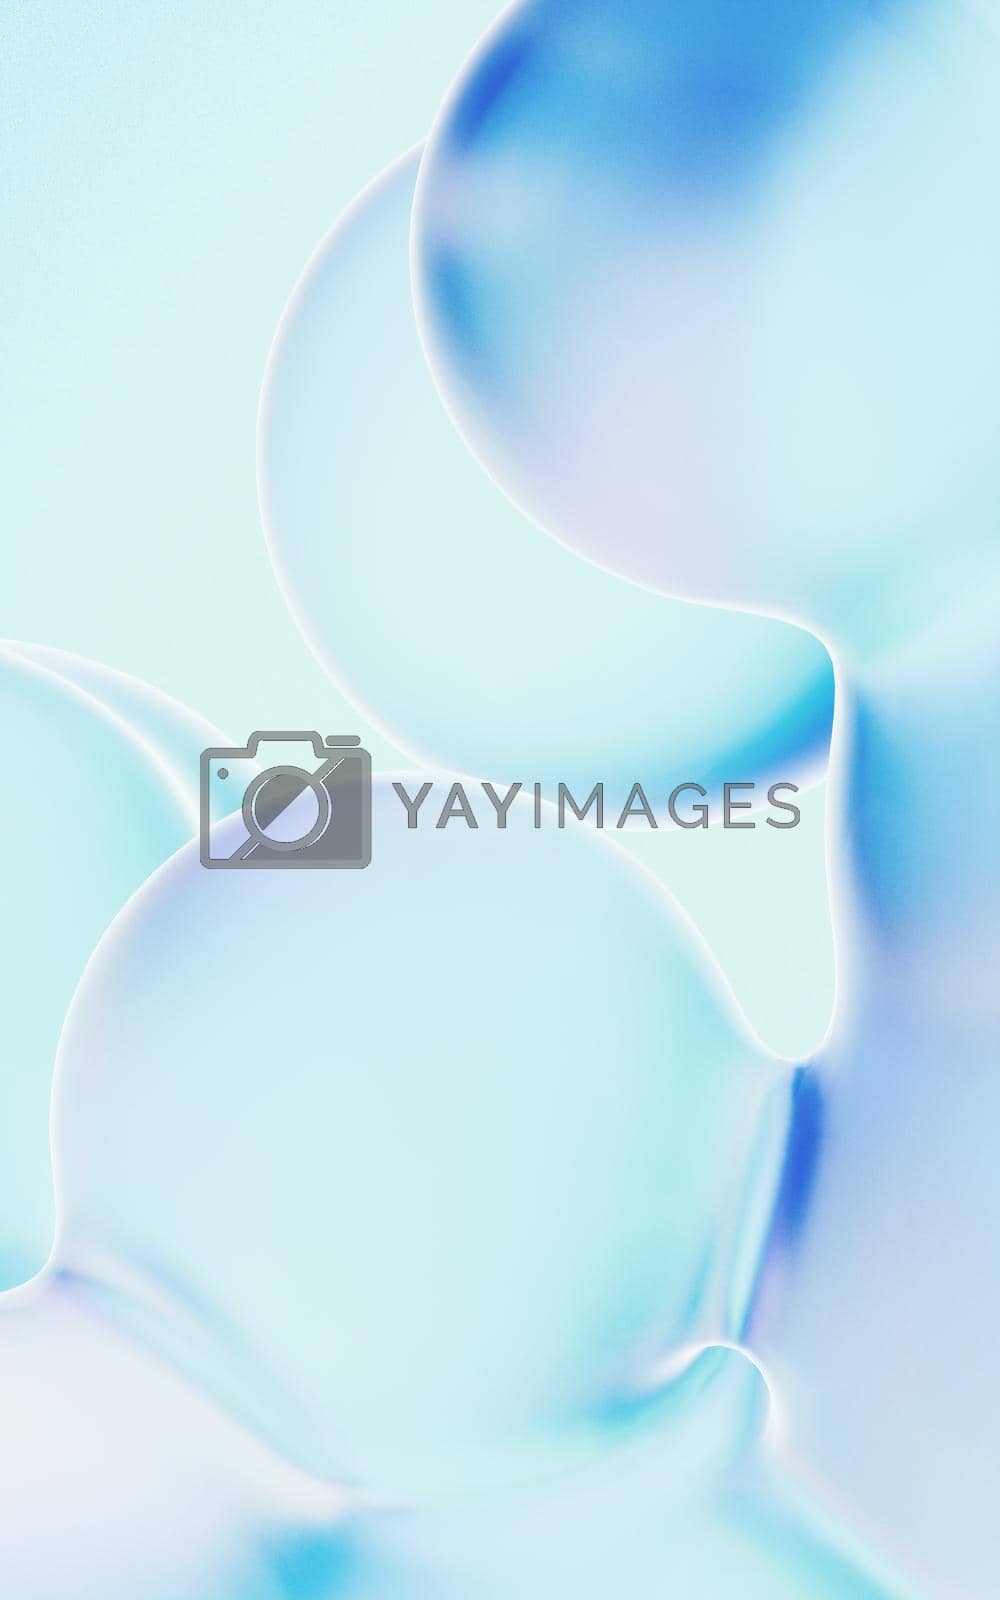 Royalty free image of Transparent gradient bubbles, 3d rendering. by vinkfan